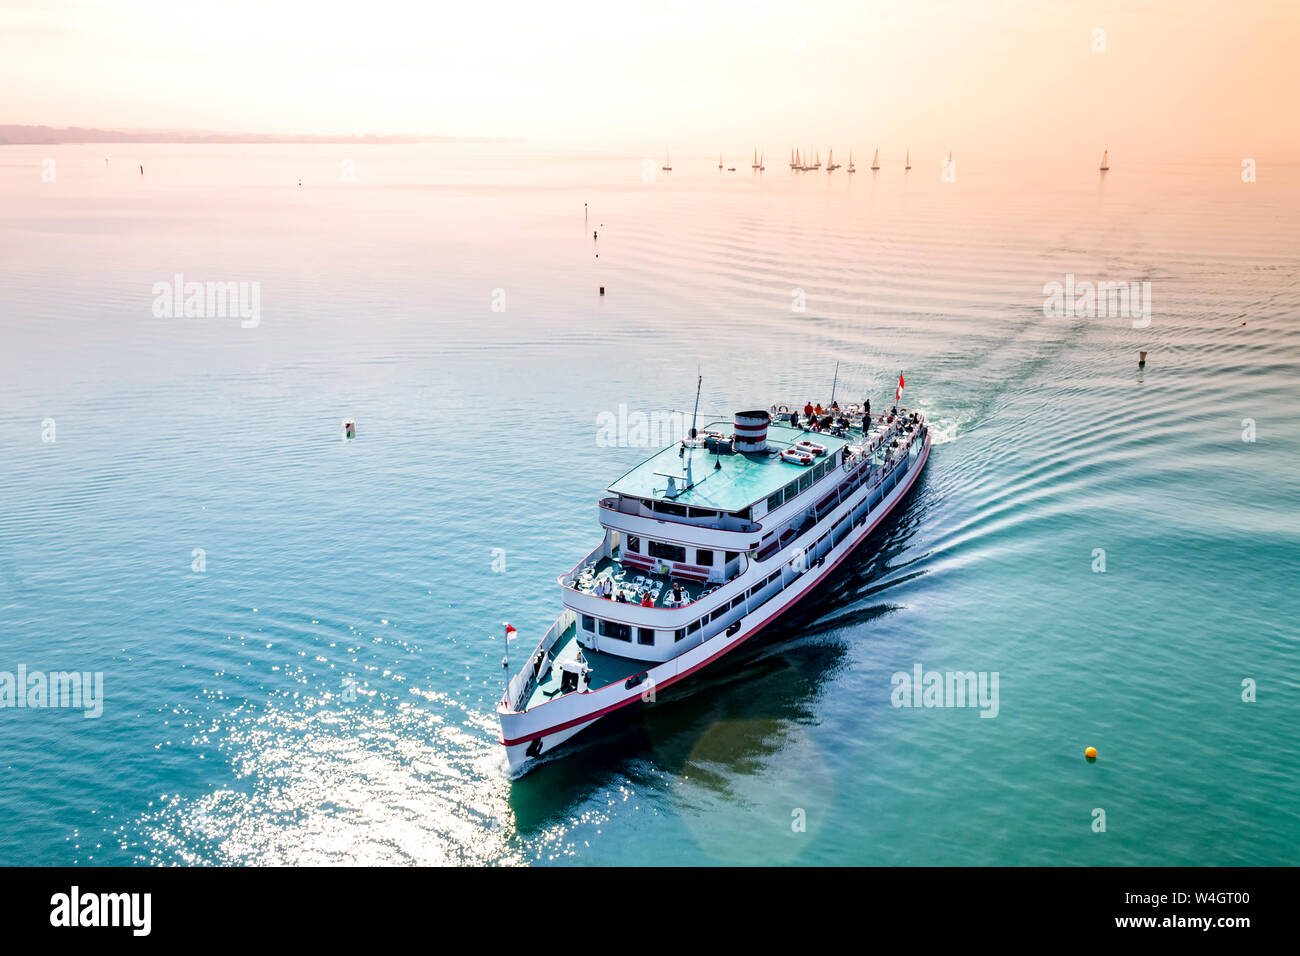 Excursion boat on Lake Constance, Friedrichshafen, Germany Stock Photo